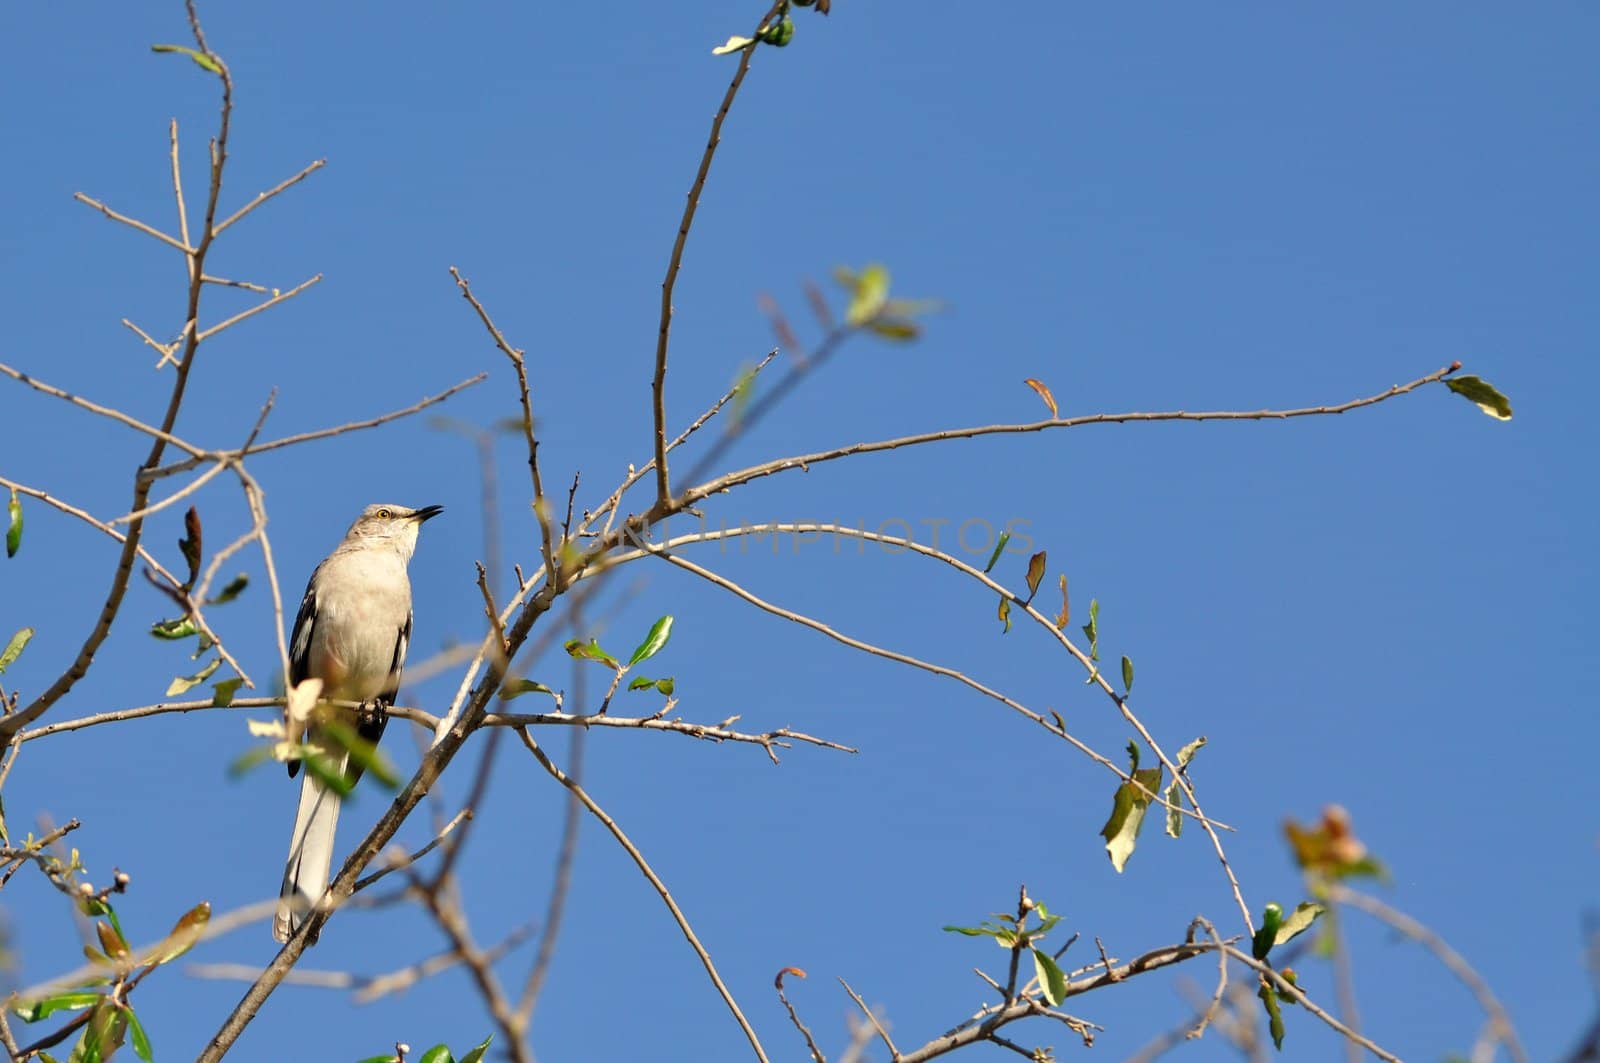 A mockingbird sings while perched on a tree.